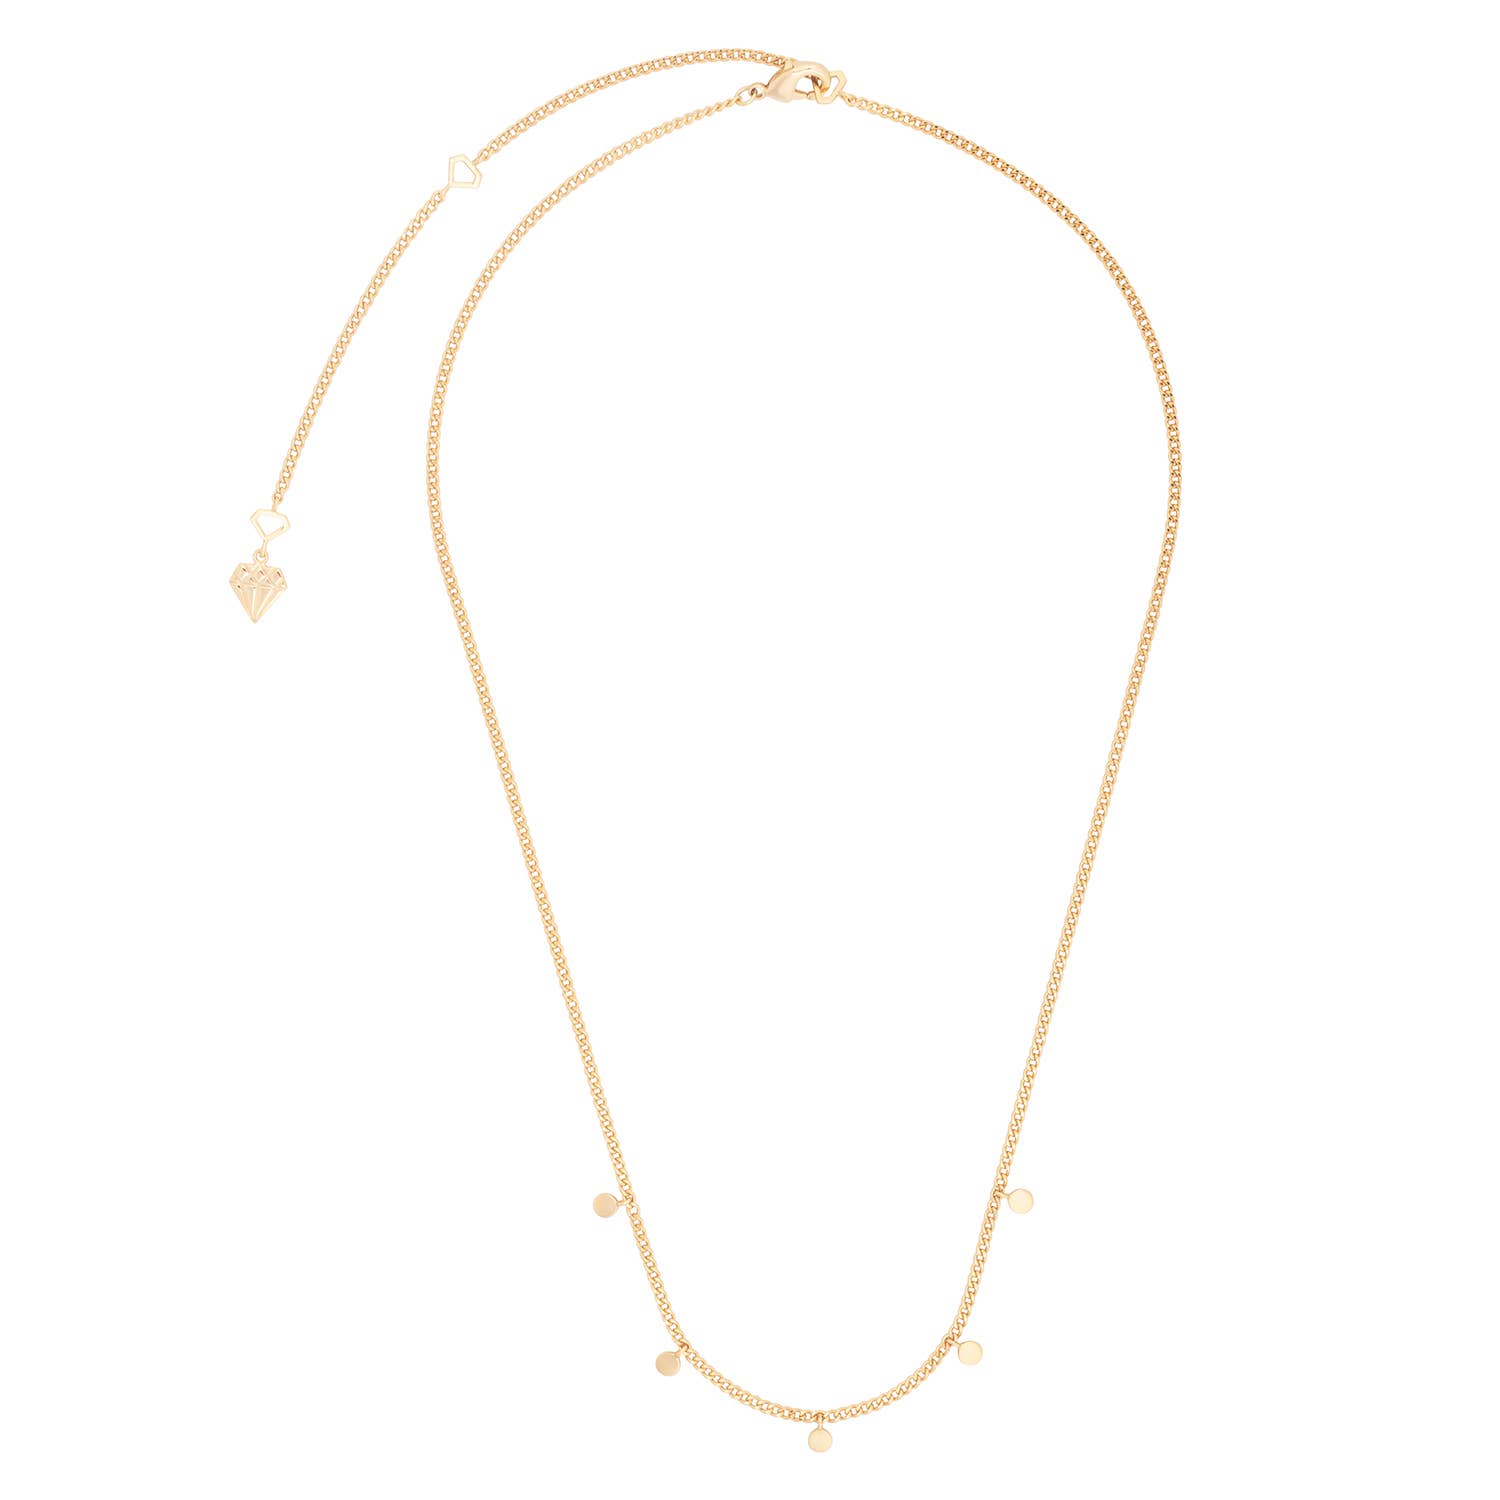 Wanderlust + Co - Belle Gold Curb Chain Necklace